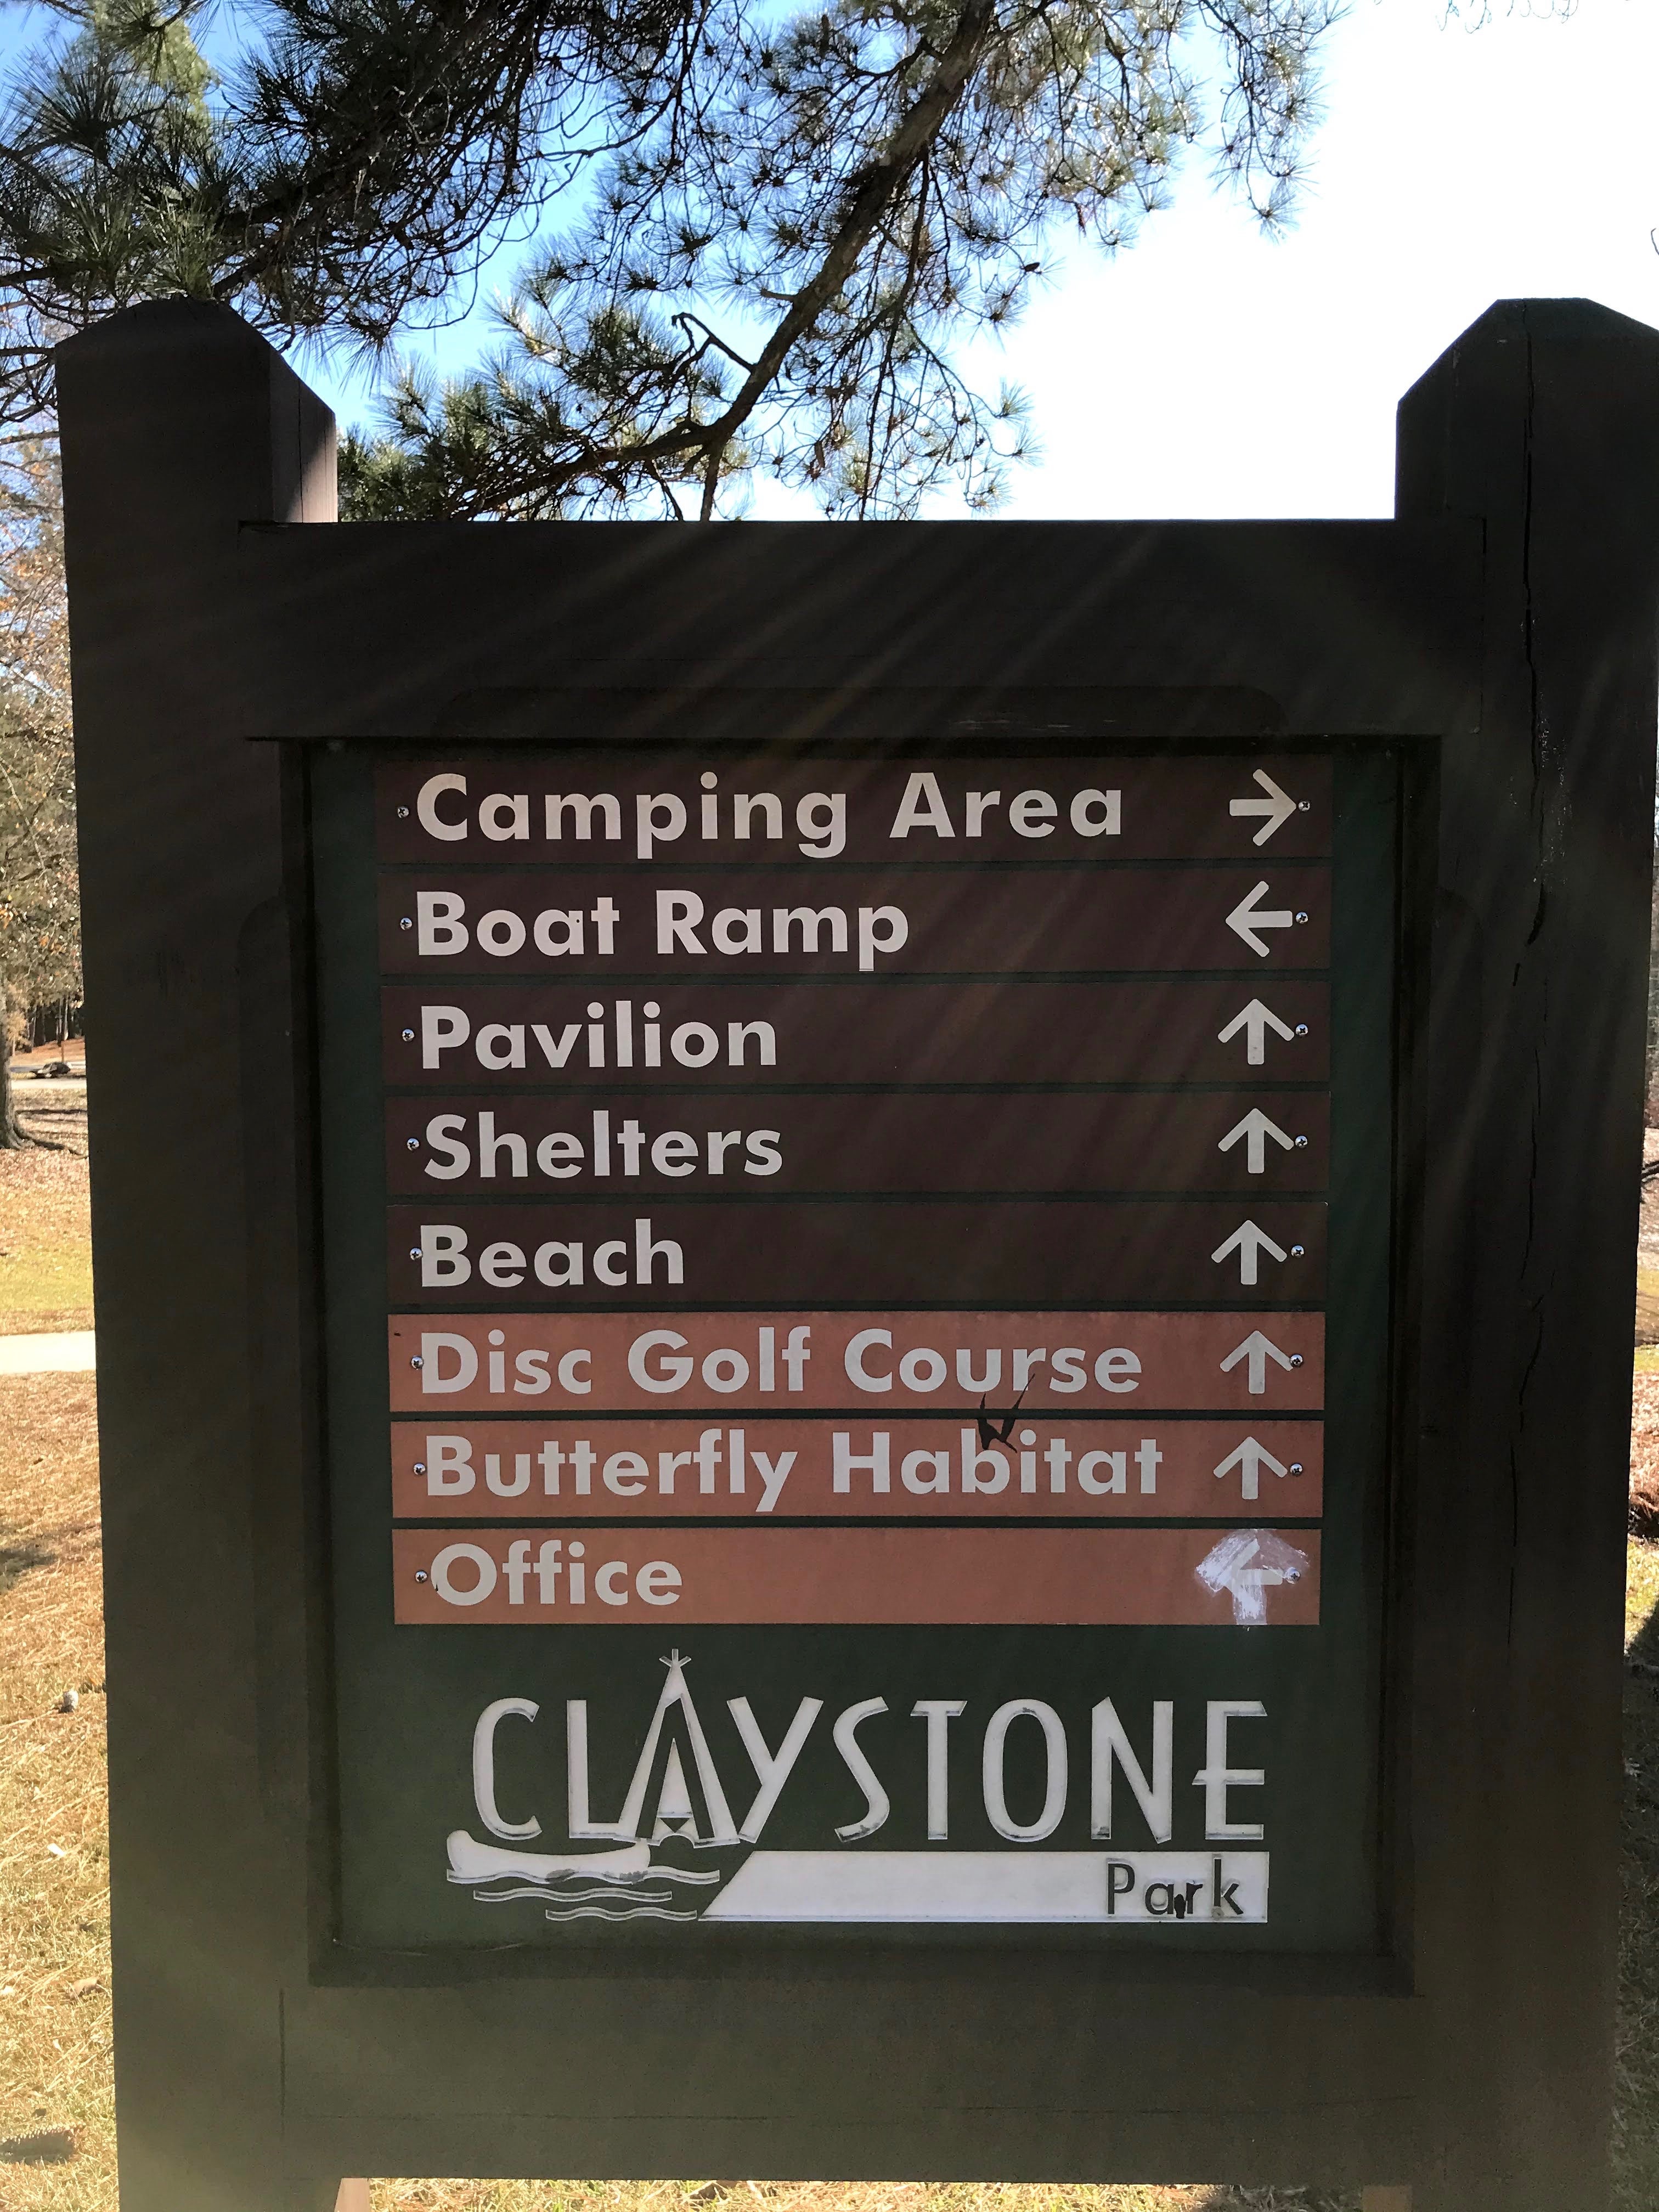 Camper submitted image from Claystone Park Campground - 3